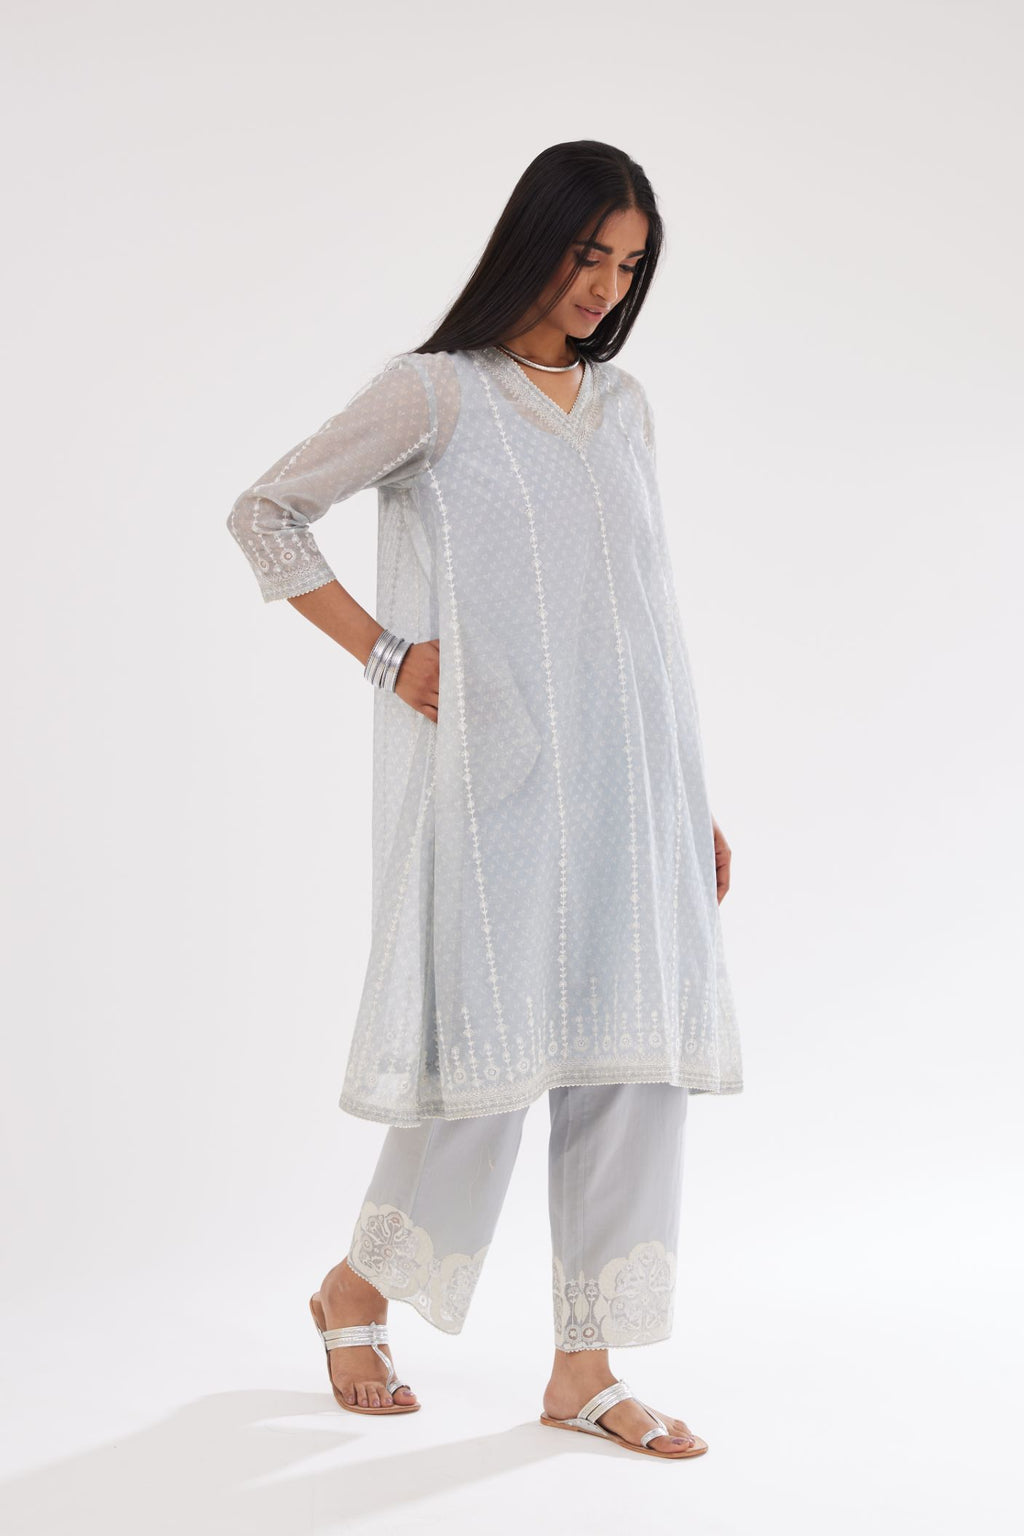 Blue hand block printed cotton chanderi A-line short kurta set with all over delicate dori and silk thread embroidery stripes.